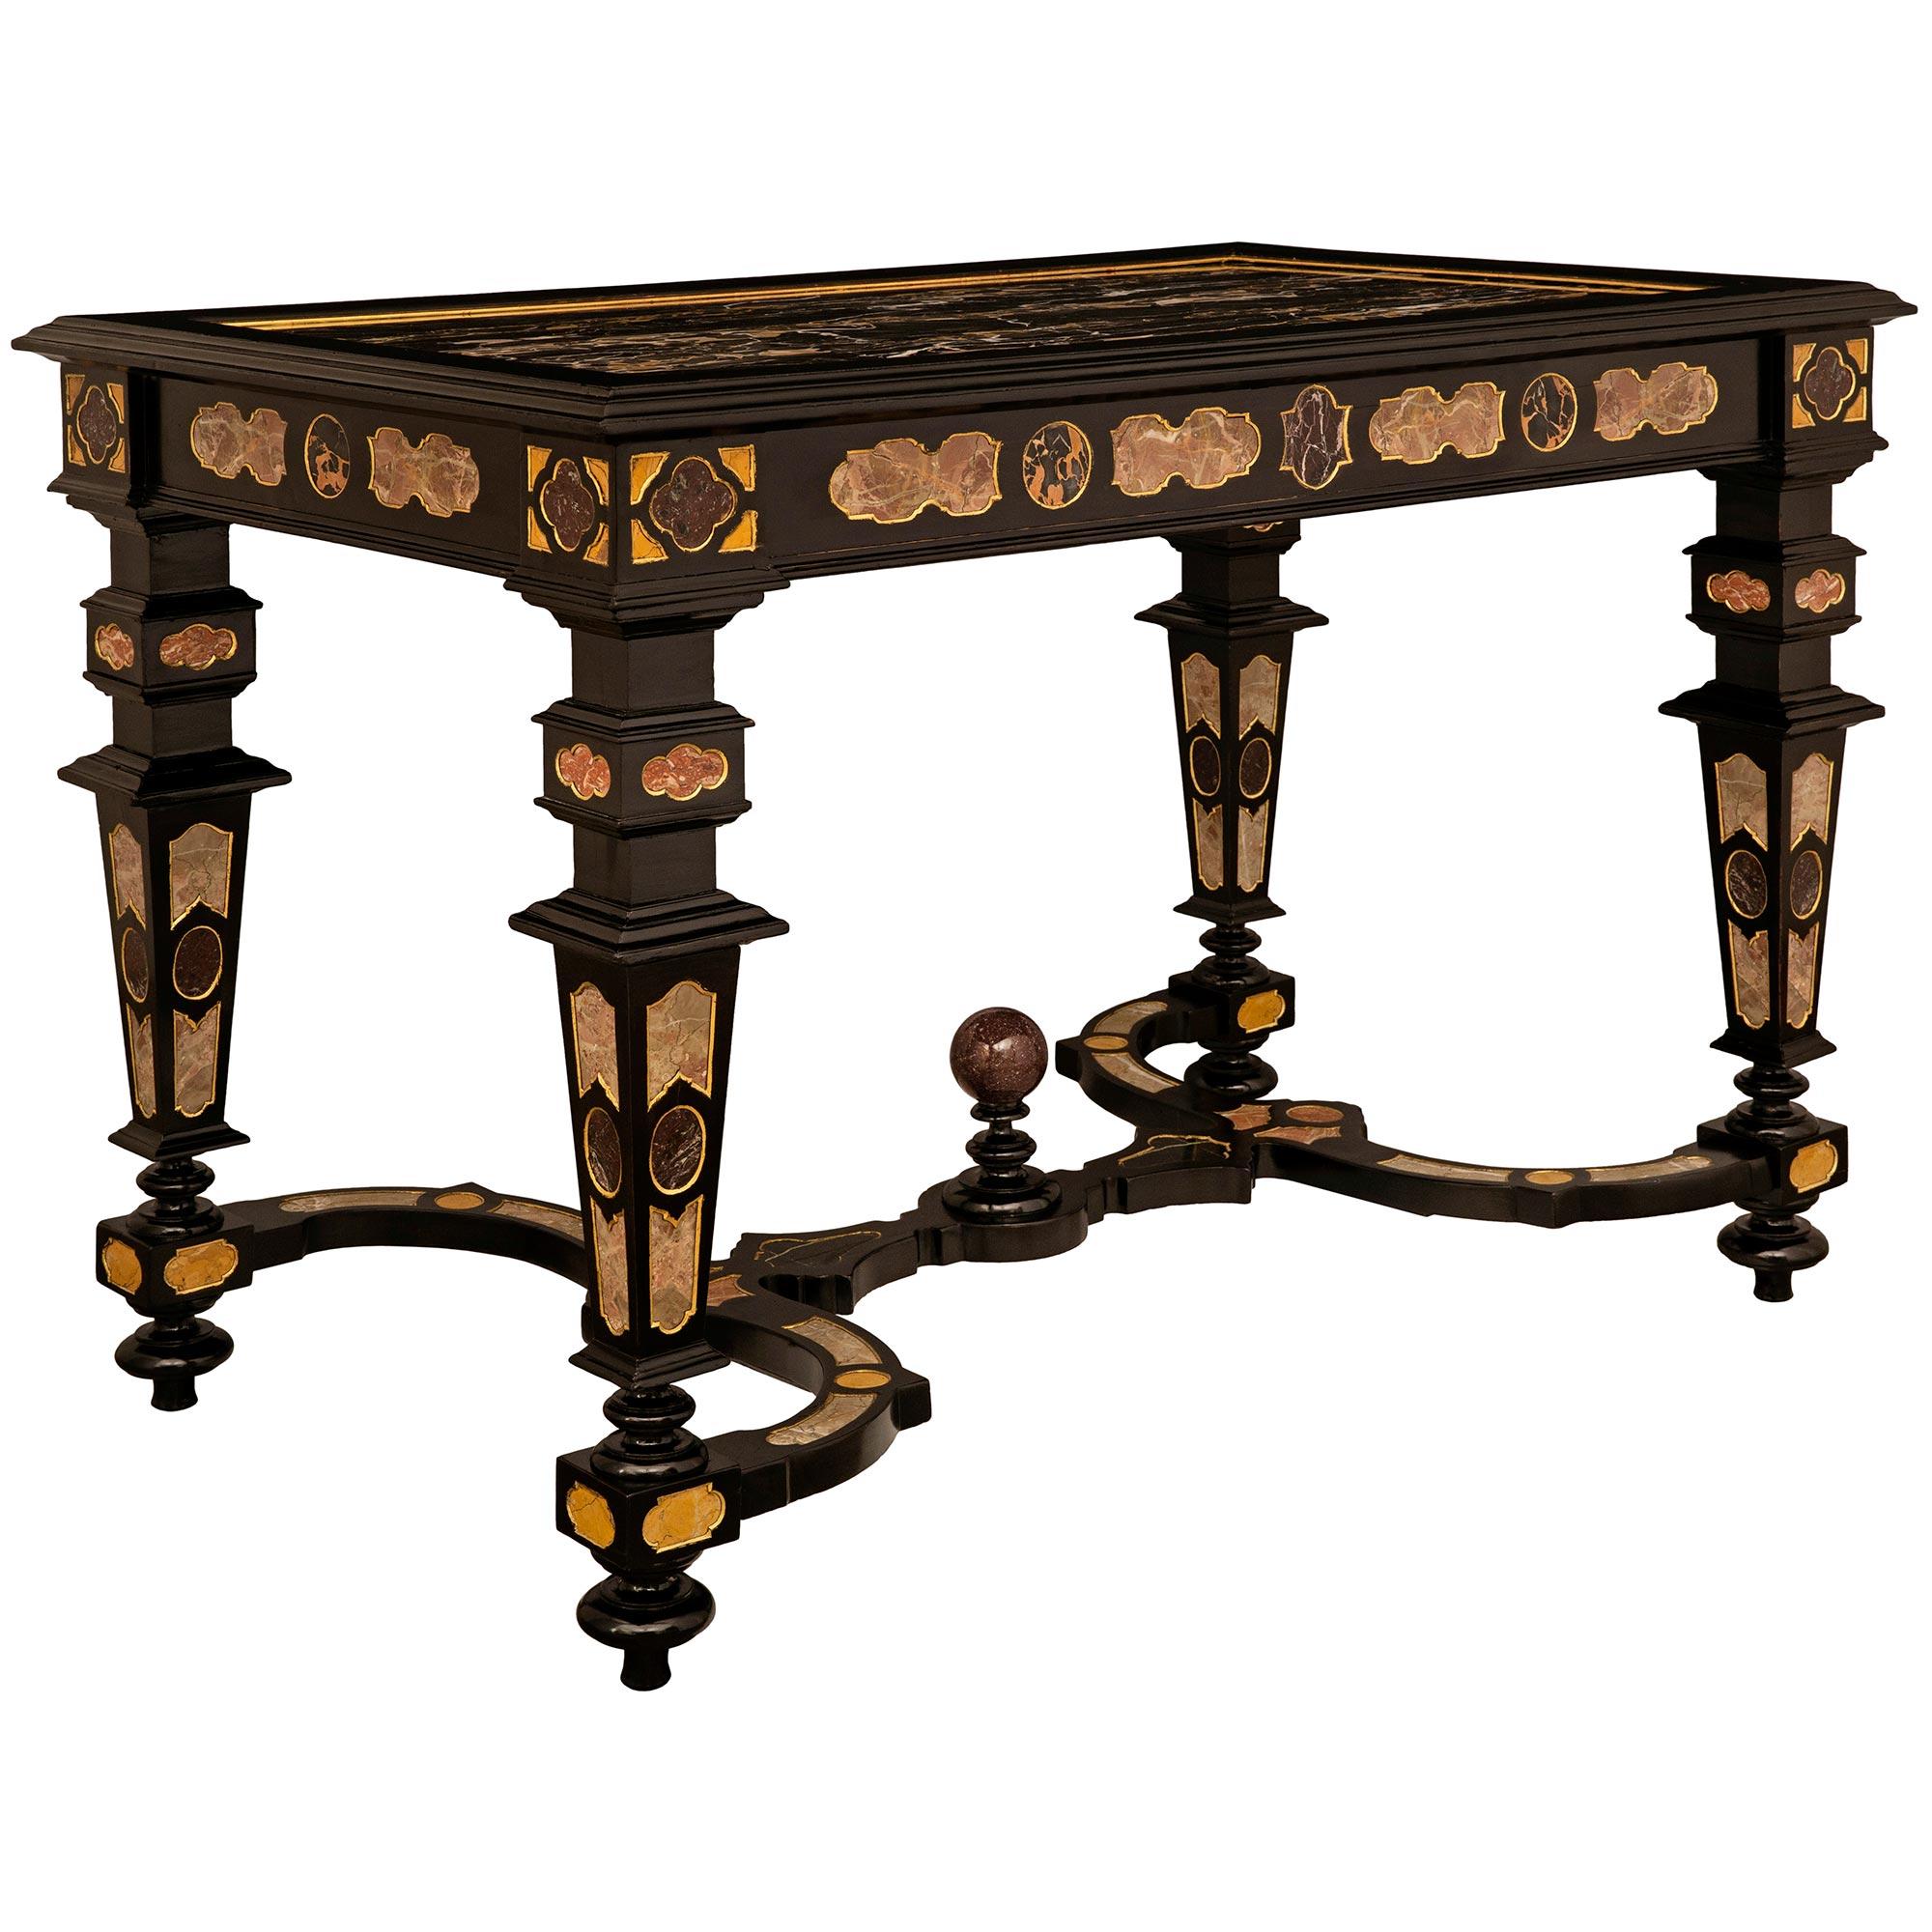 Italian 19th c. Baroque St. Ebonized Fruitwood And Portoro Marble Center Table In Good Condition For Sale In West Palm Beach, FL